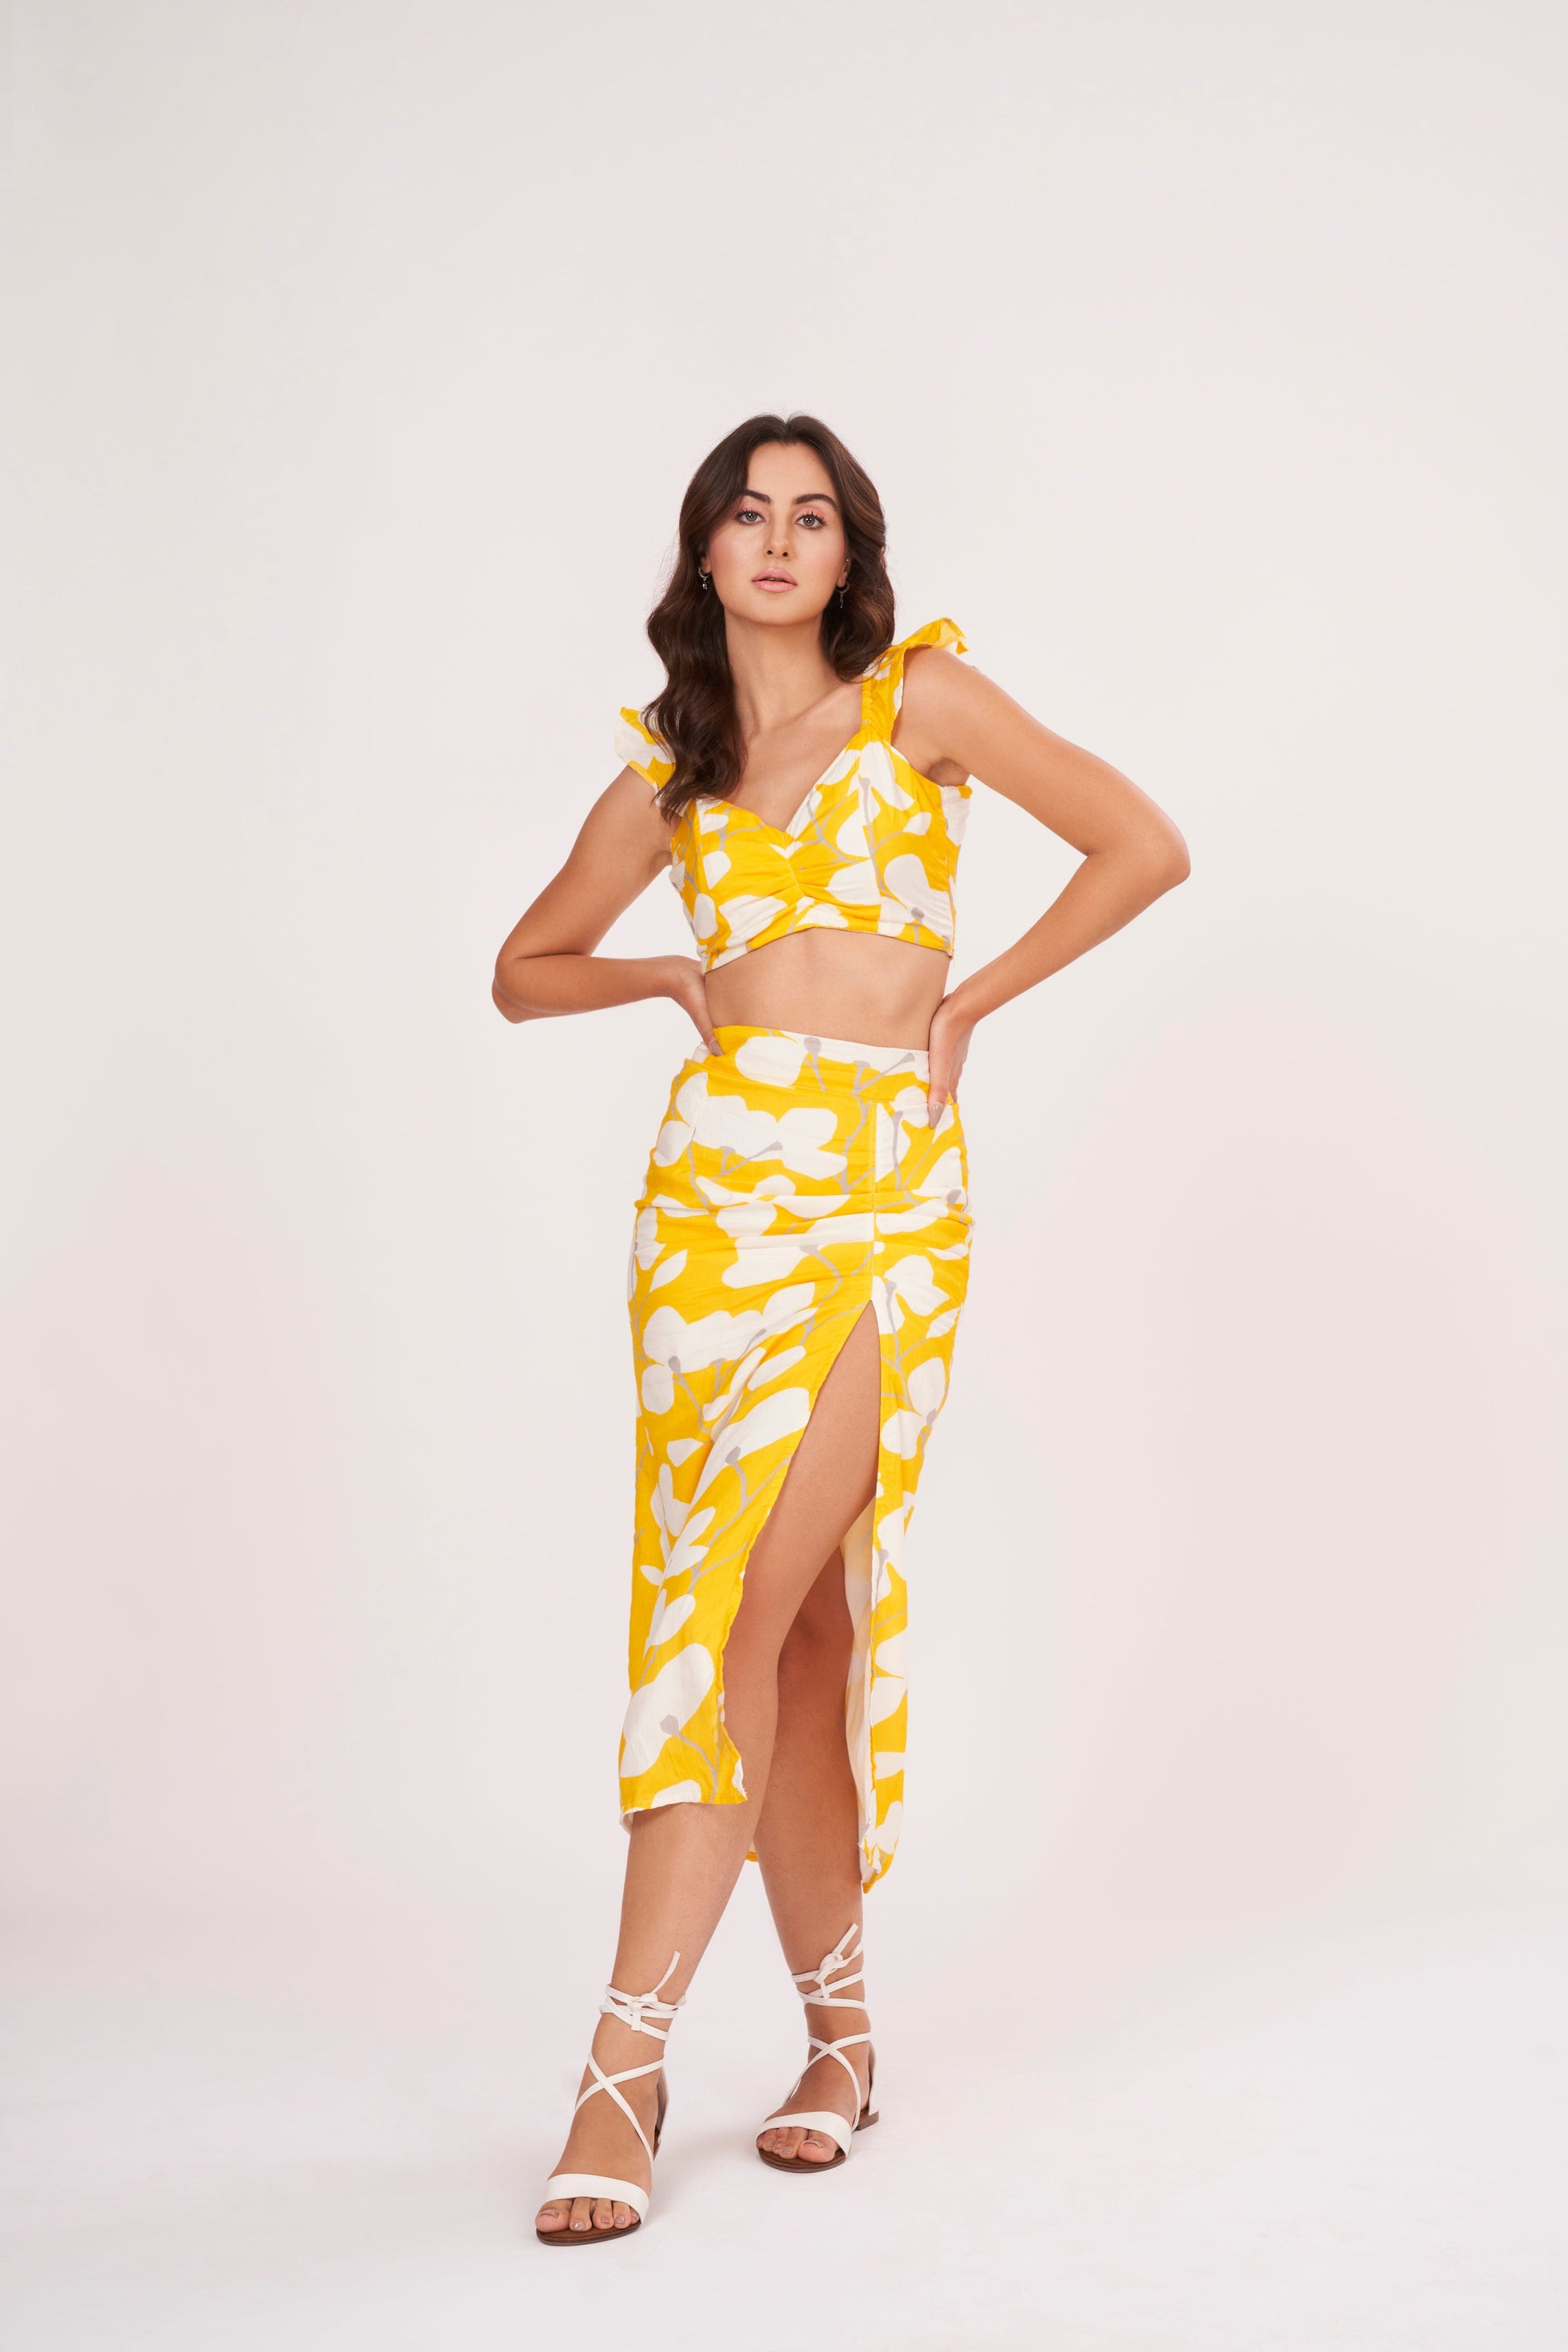 Thigh-length floral skirt with lightweight muslin fabric, ensuring comfort in hot weather. Abstract print exudes sophistication, while trendy cut complements modern appeal.